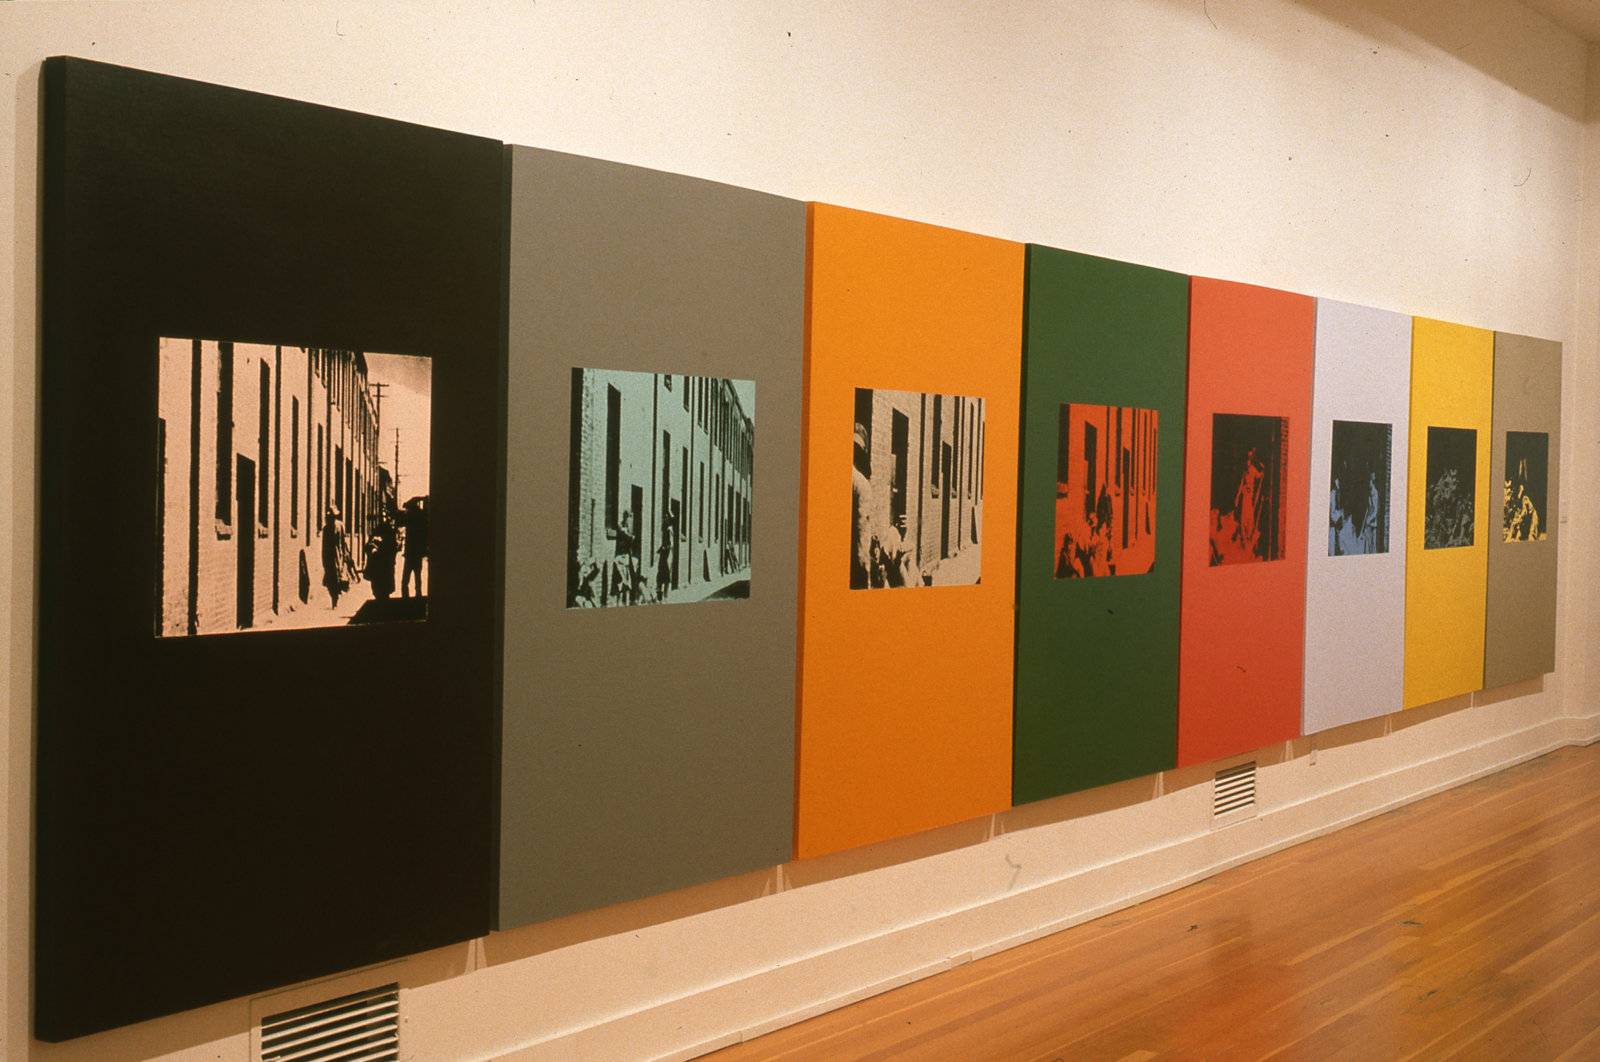 Ian Wallace, Poverty 1982 (detail), 1982, oil-based silkscreen over acrylic paint on canvas, 8 panels, 71 x 376 in. (180 x 955 cm)